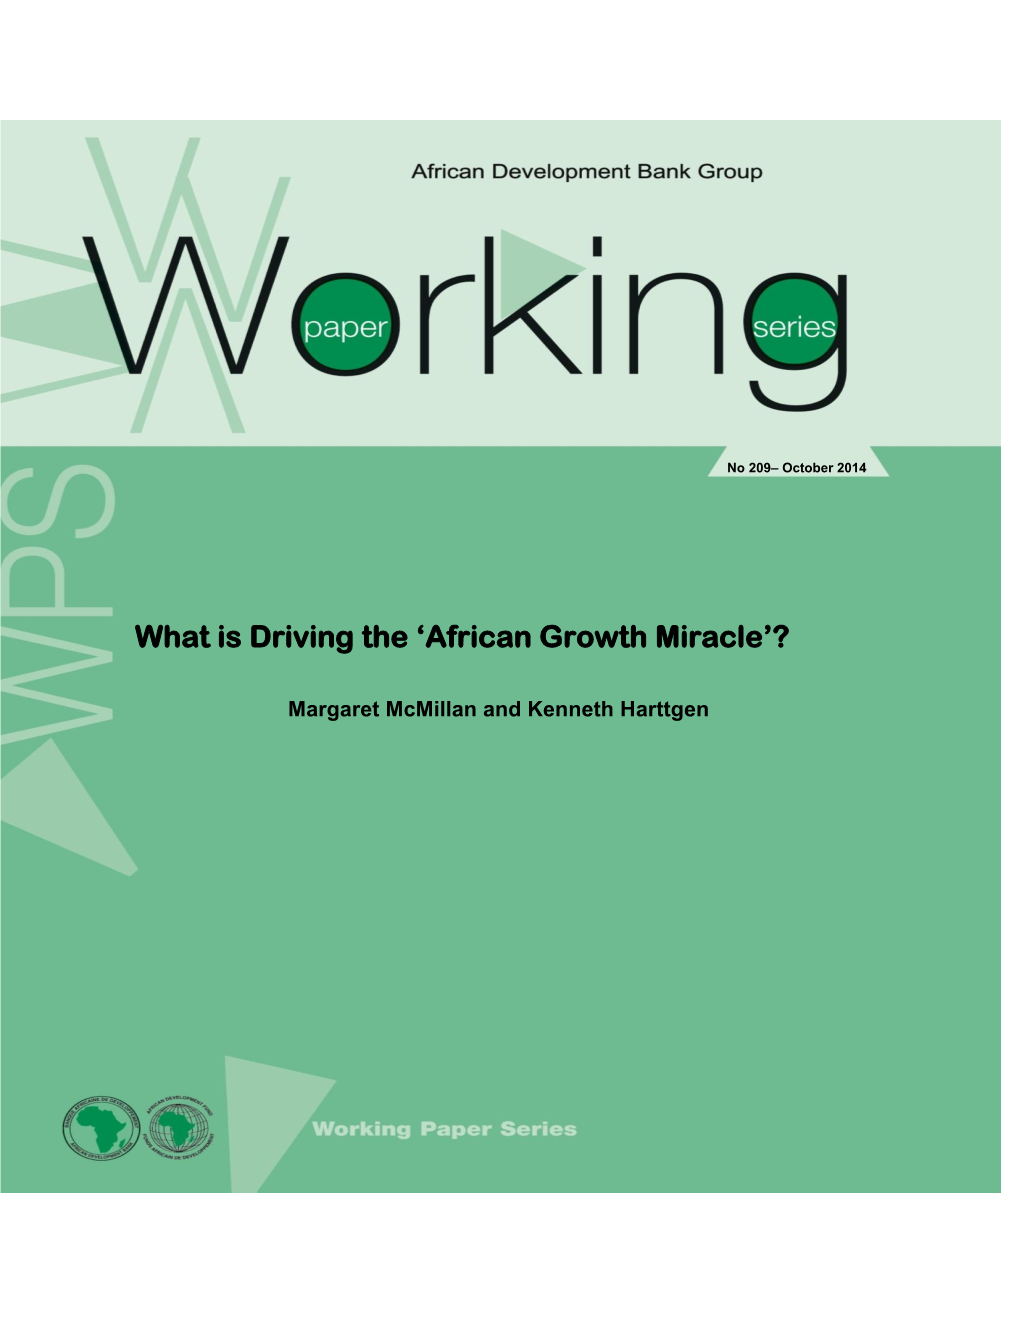 Working Paper Series (WPS) Is Produced by the Development Research Department of the African Development Bank